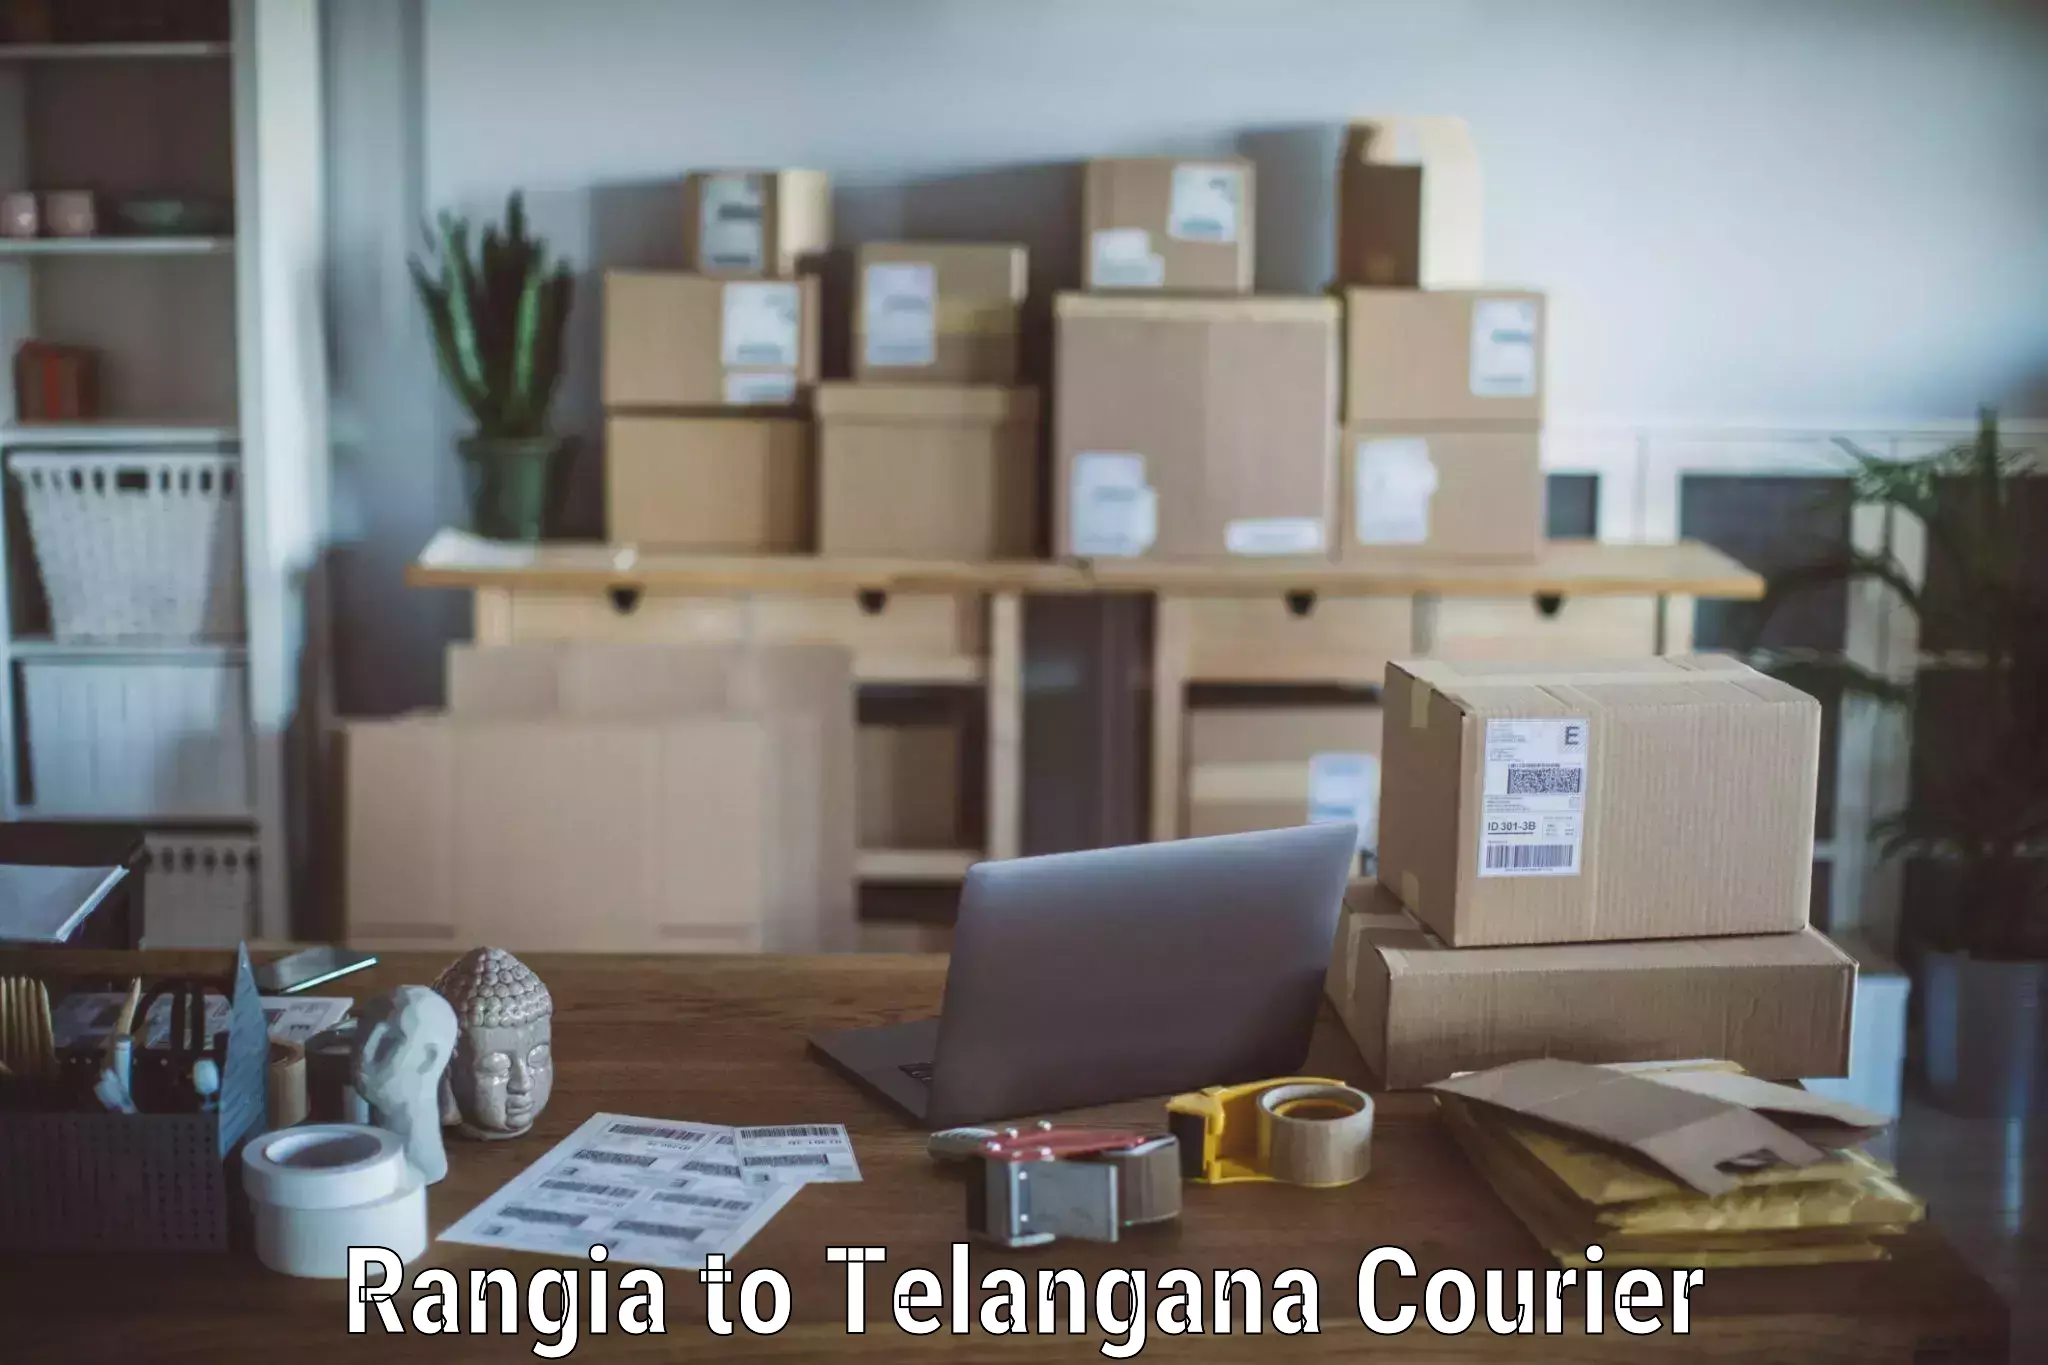 Furniture delivery service Rangia to Sultanabad